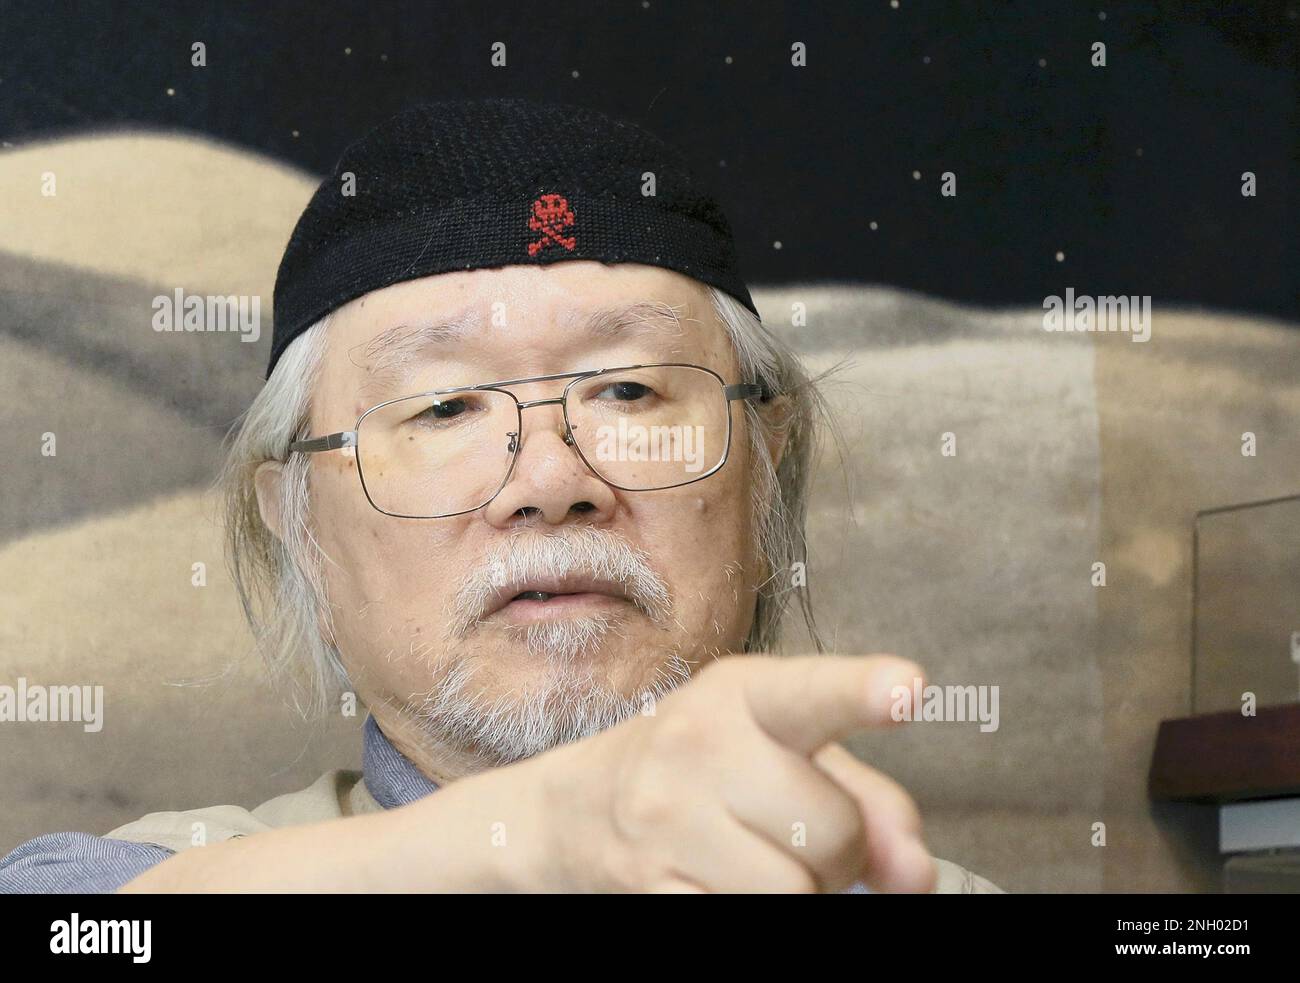 A file photo shows Japanese manga artist Leiji Matsumoto in Tokyo on July 22, 2014. Matsumoto who is famous for Space Battleship Yamato, Space Pirate Captain Harlock, Galaxy Express 999 died on Feb. 13, 2023 at the age of 85. ( The Yomiuri Shimbun via AP Images ) Stock Photo